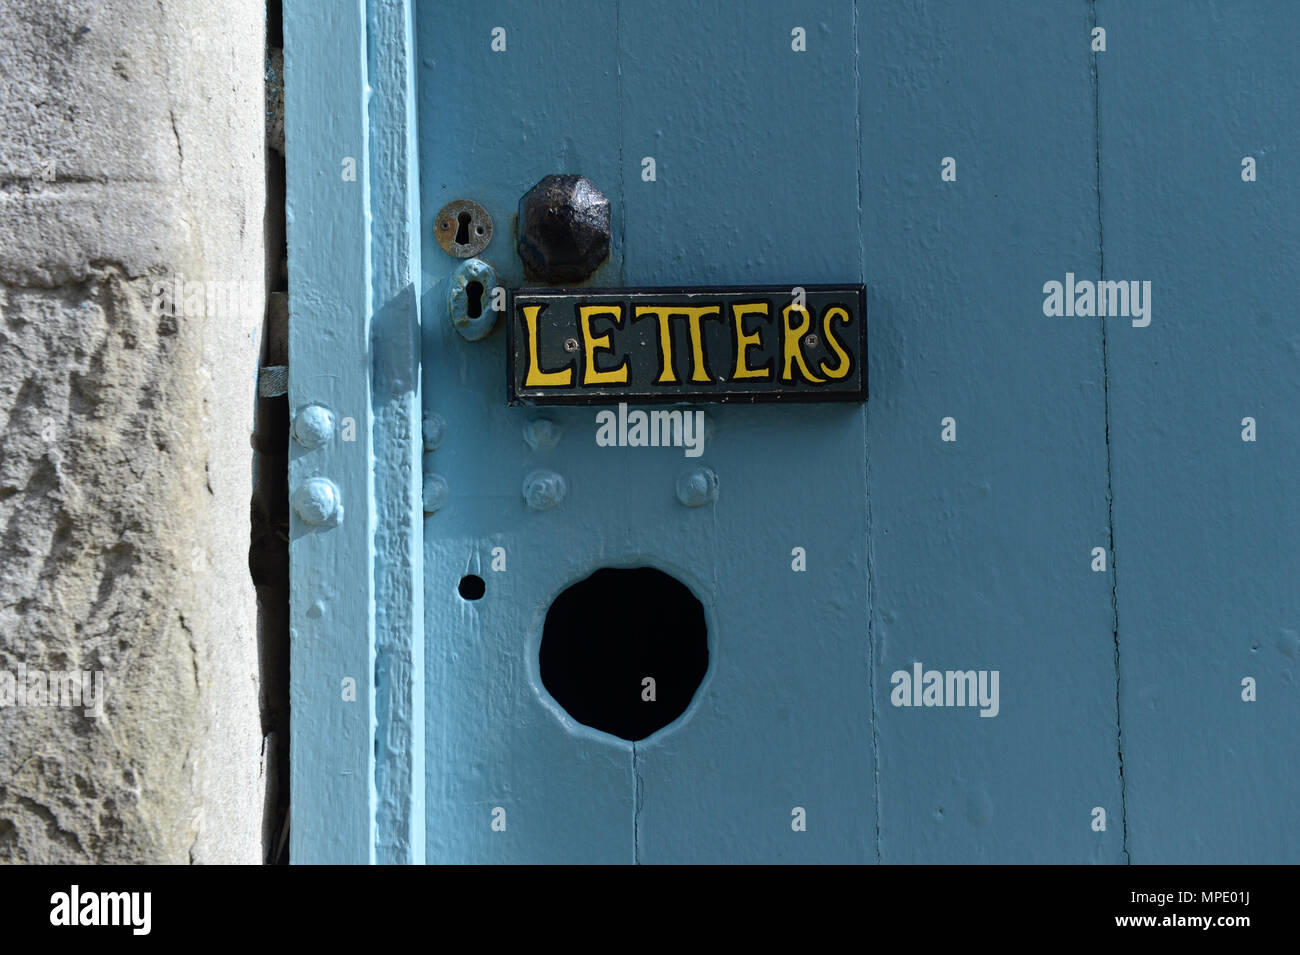 Unusual letter box with a hole in the door for letters to be delivered with hand painted sign Letters above it Stock Photo